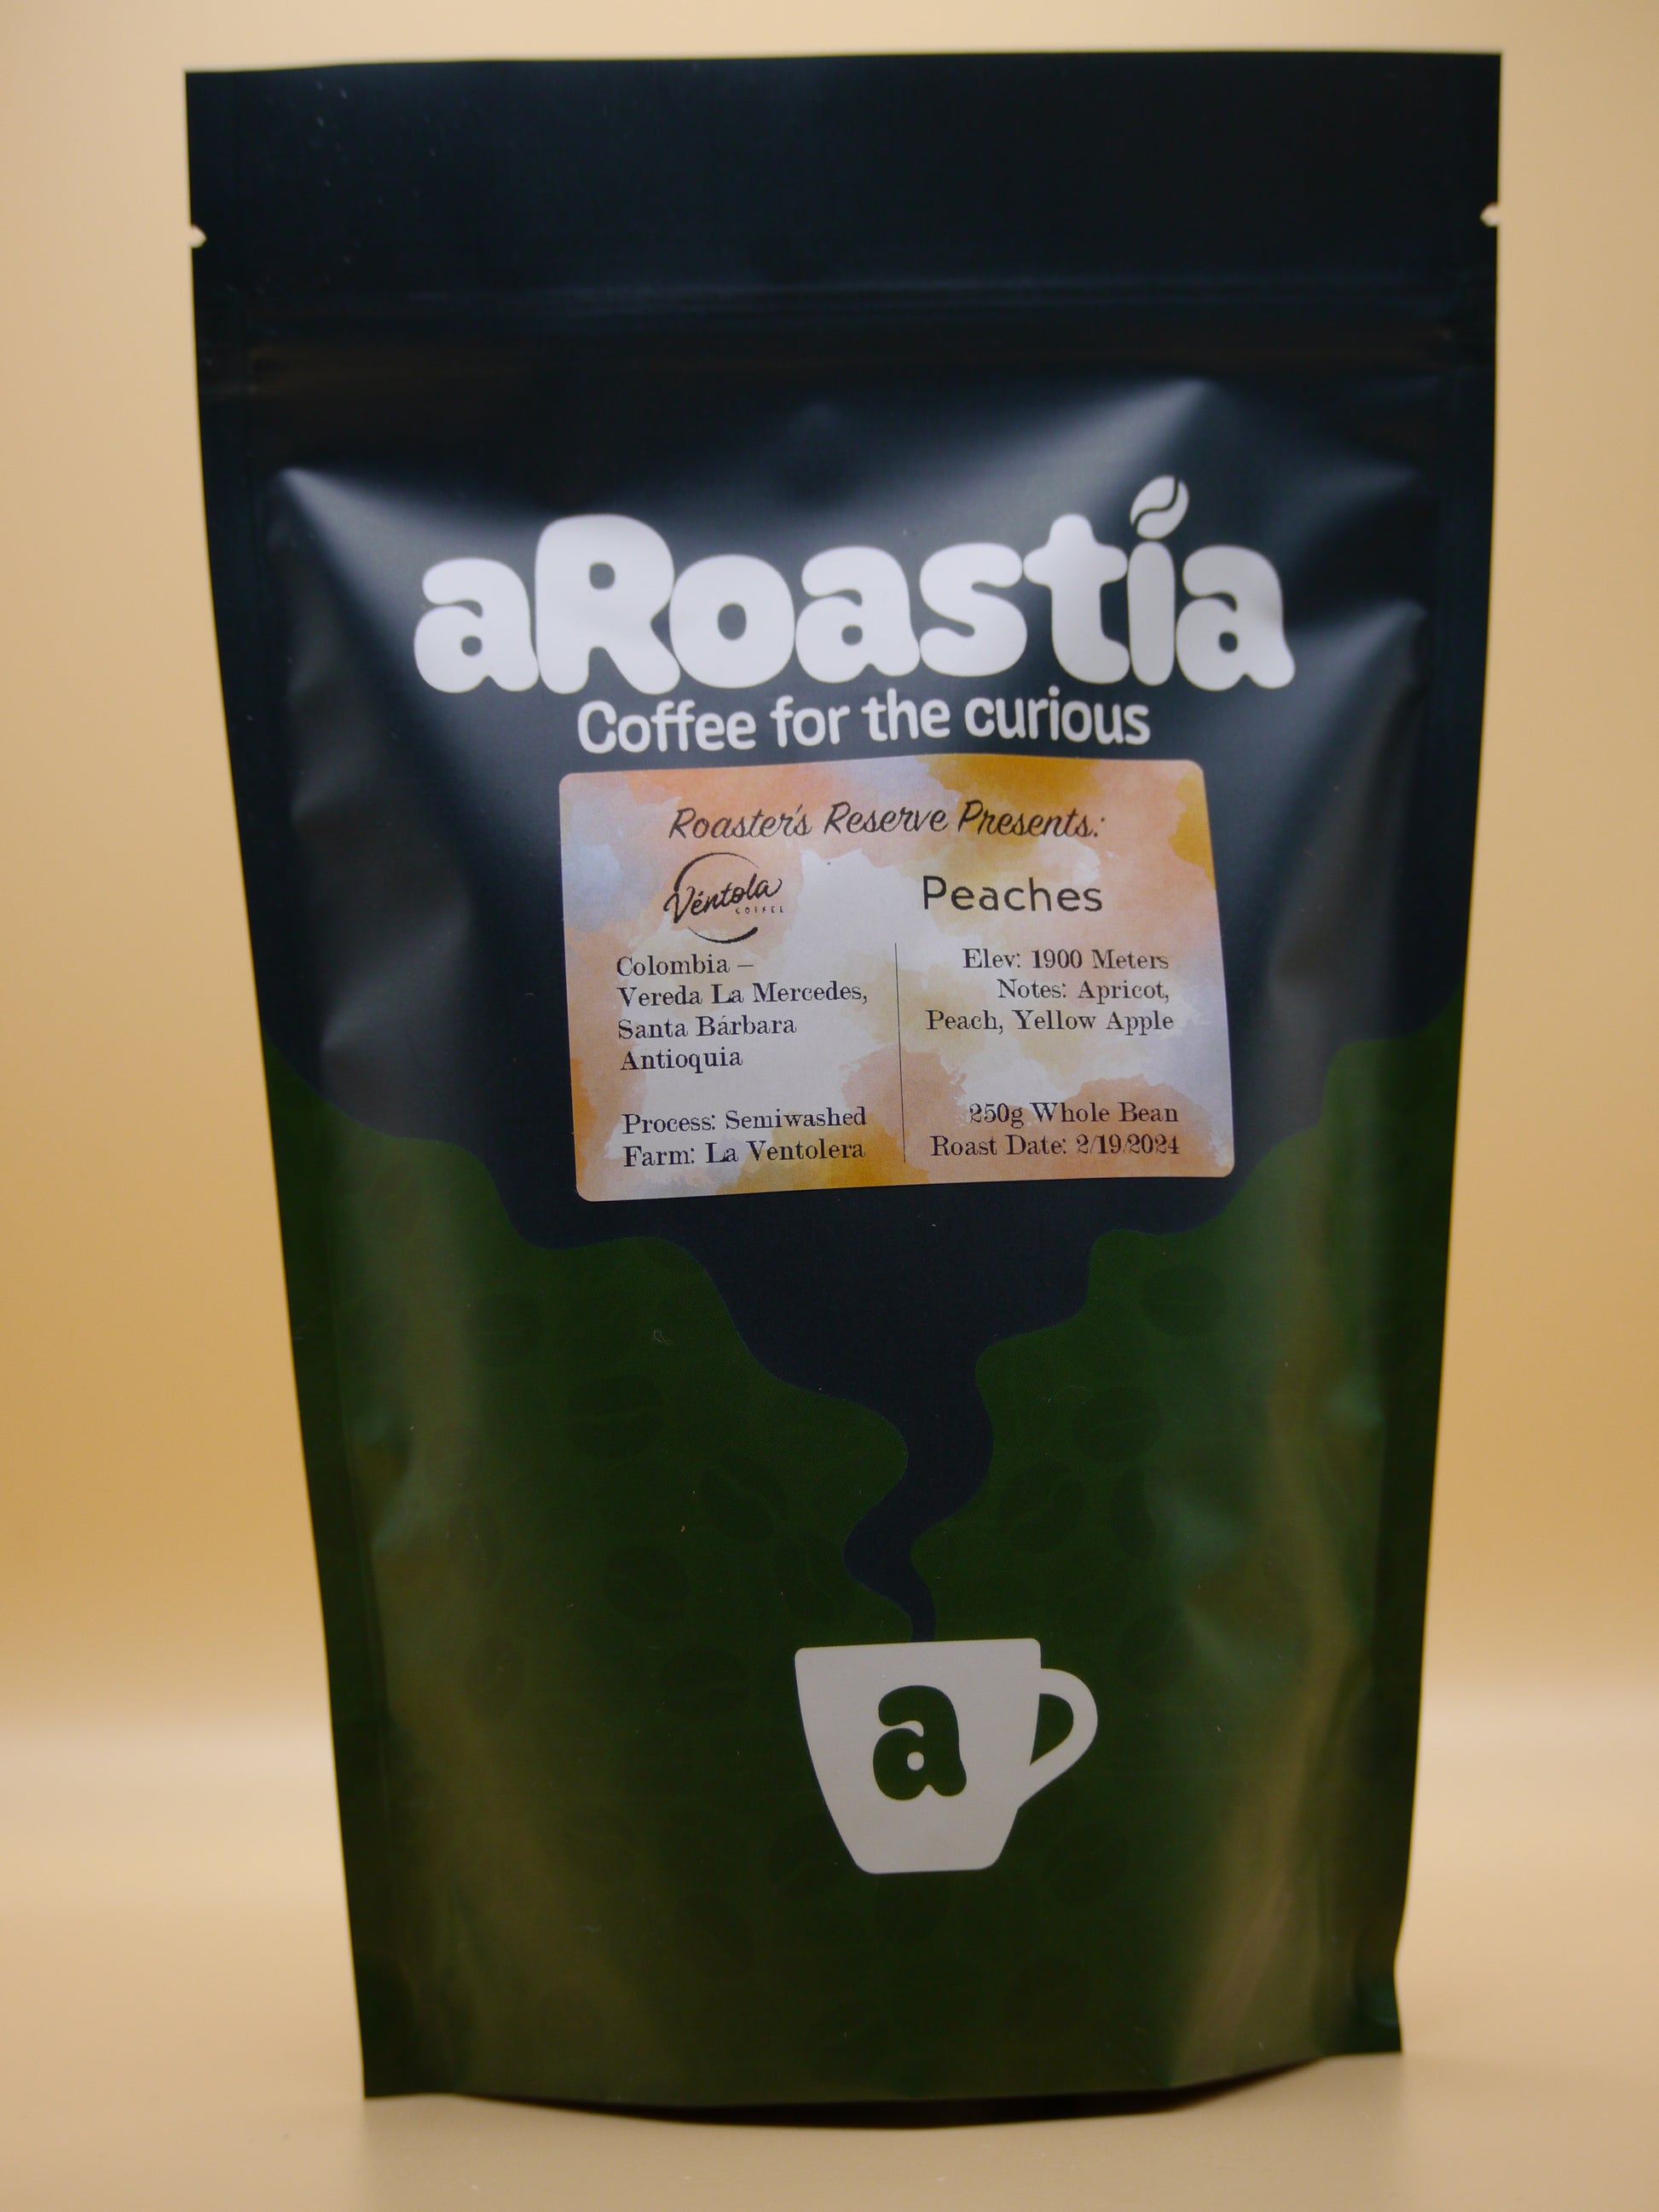 A photo of a bag of Peaches, a washed processed coffee offered by aRoastia. The bag has an orange colored label on it, with information about the coffee. The coffee beans were picked at an elevation of 1900 meters above sea level, and went through a semiwashed process.